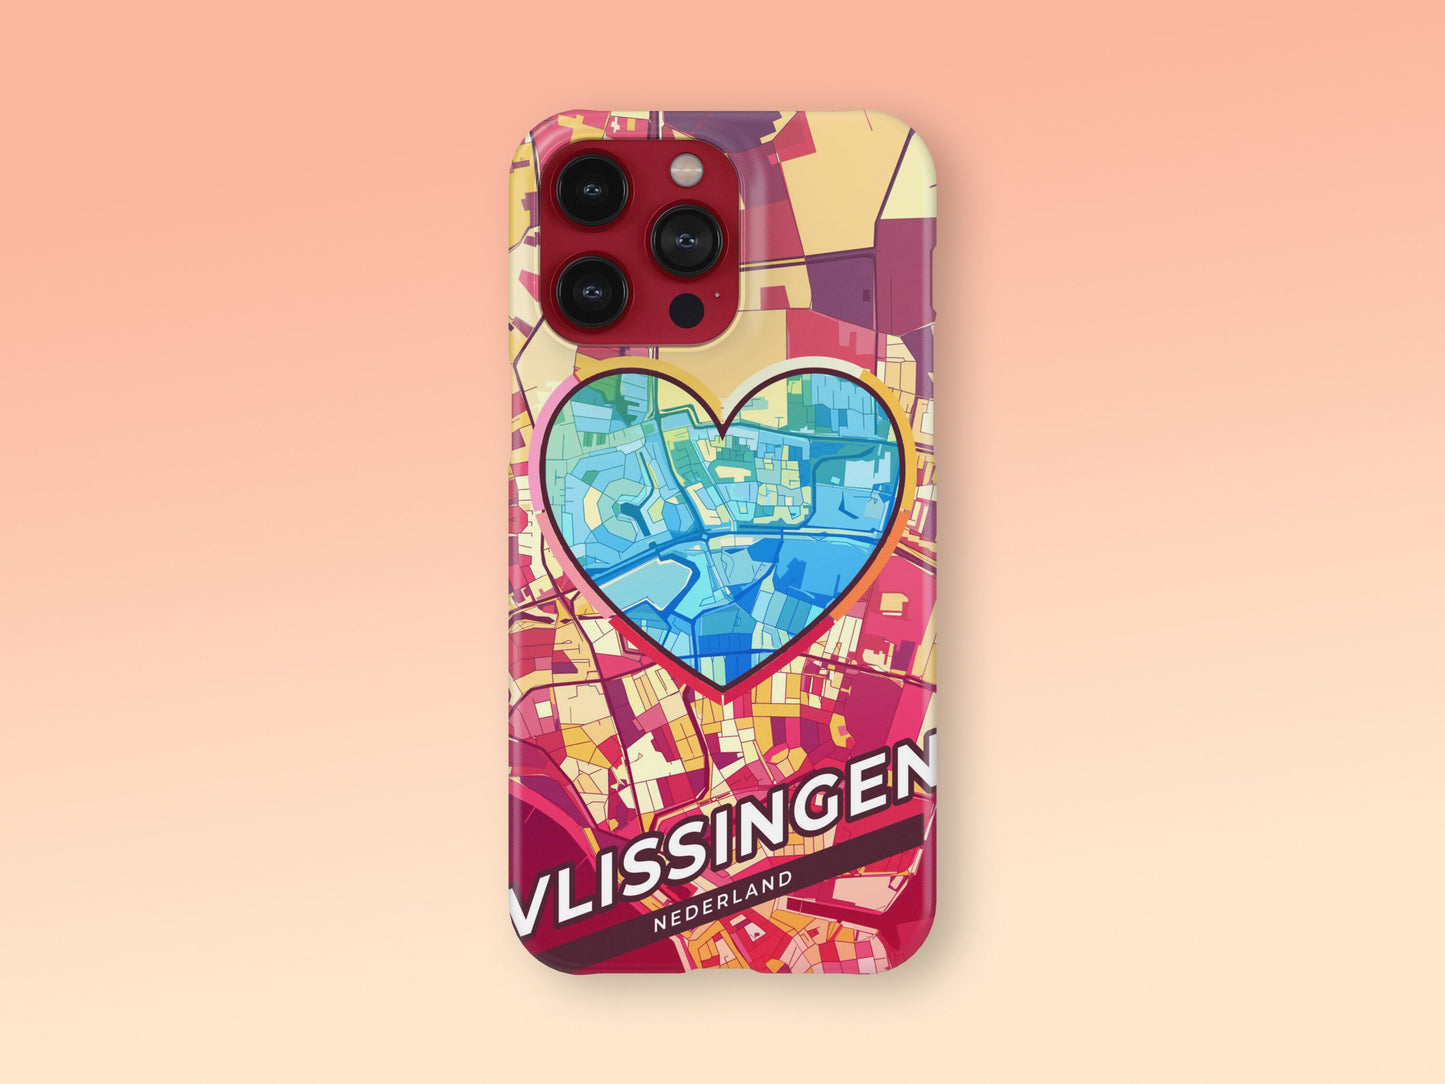 Vlissingen Netherlands slim phone case with colorful icon 2